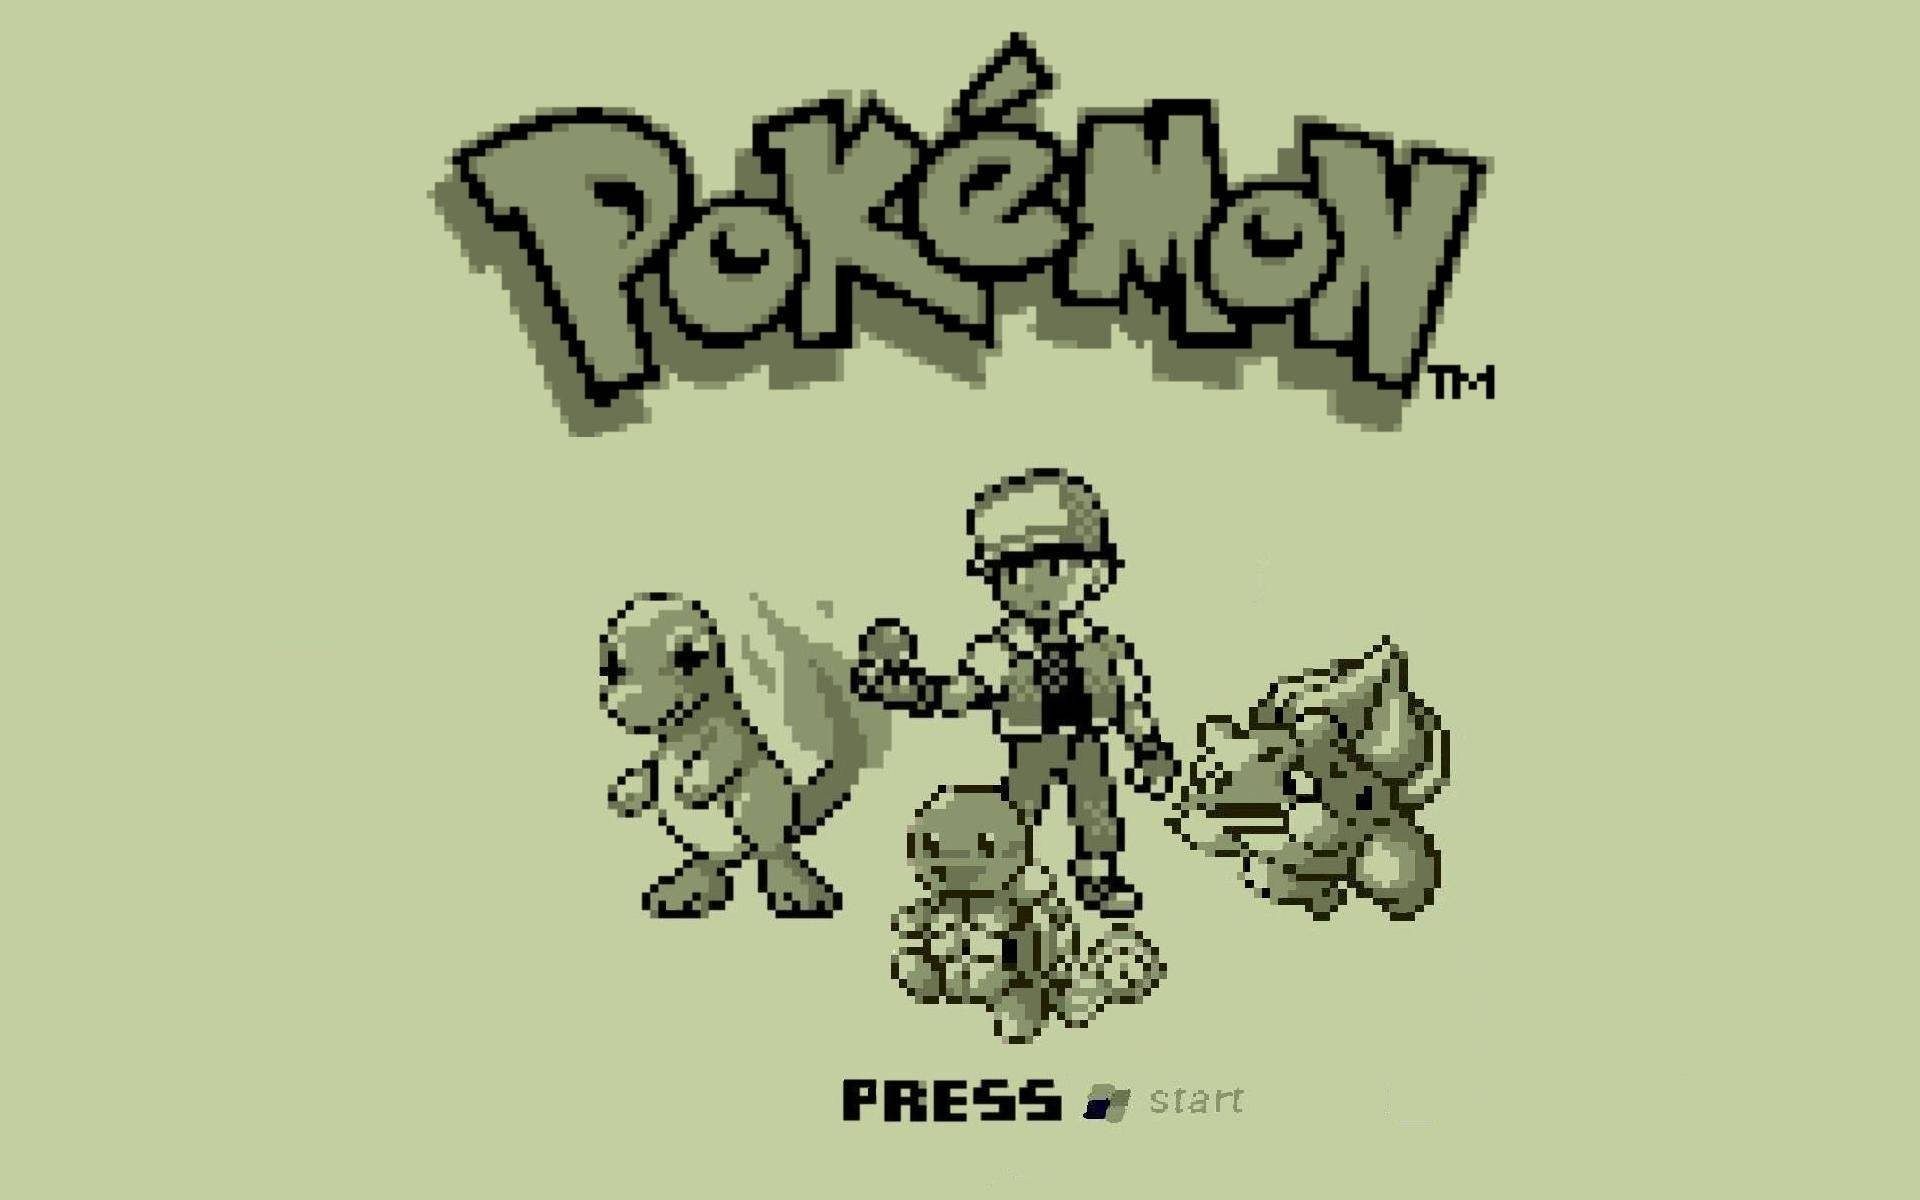 A Monochrome Pixelated Squirtle Pokemon Ready For A Battle Background